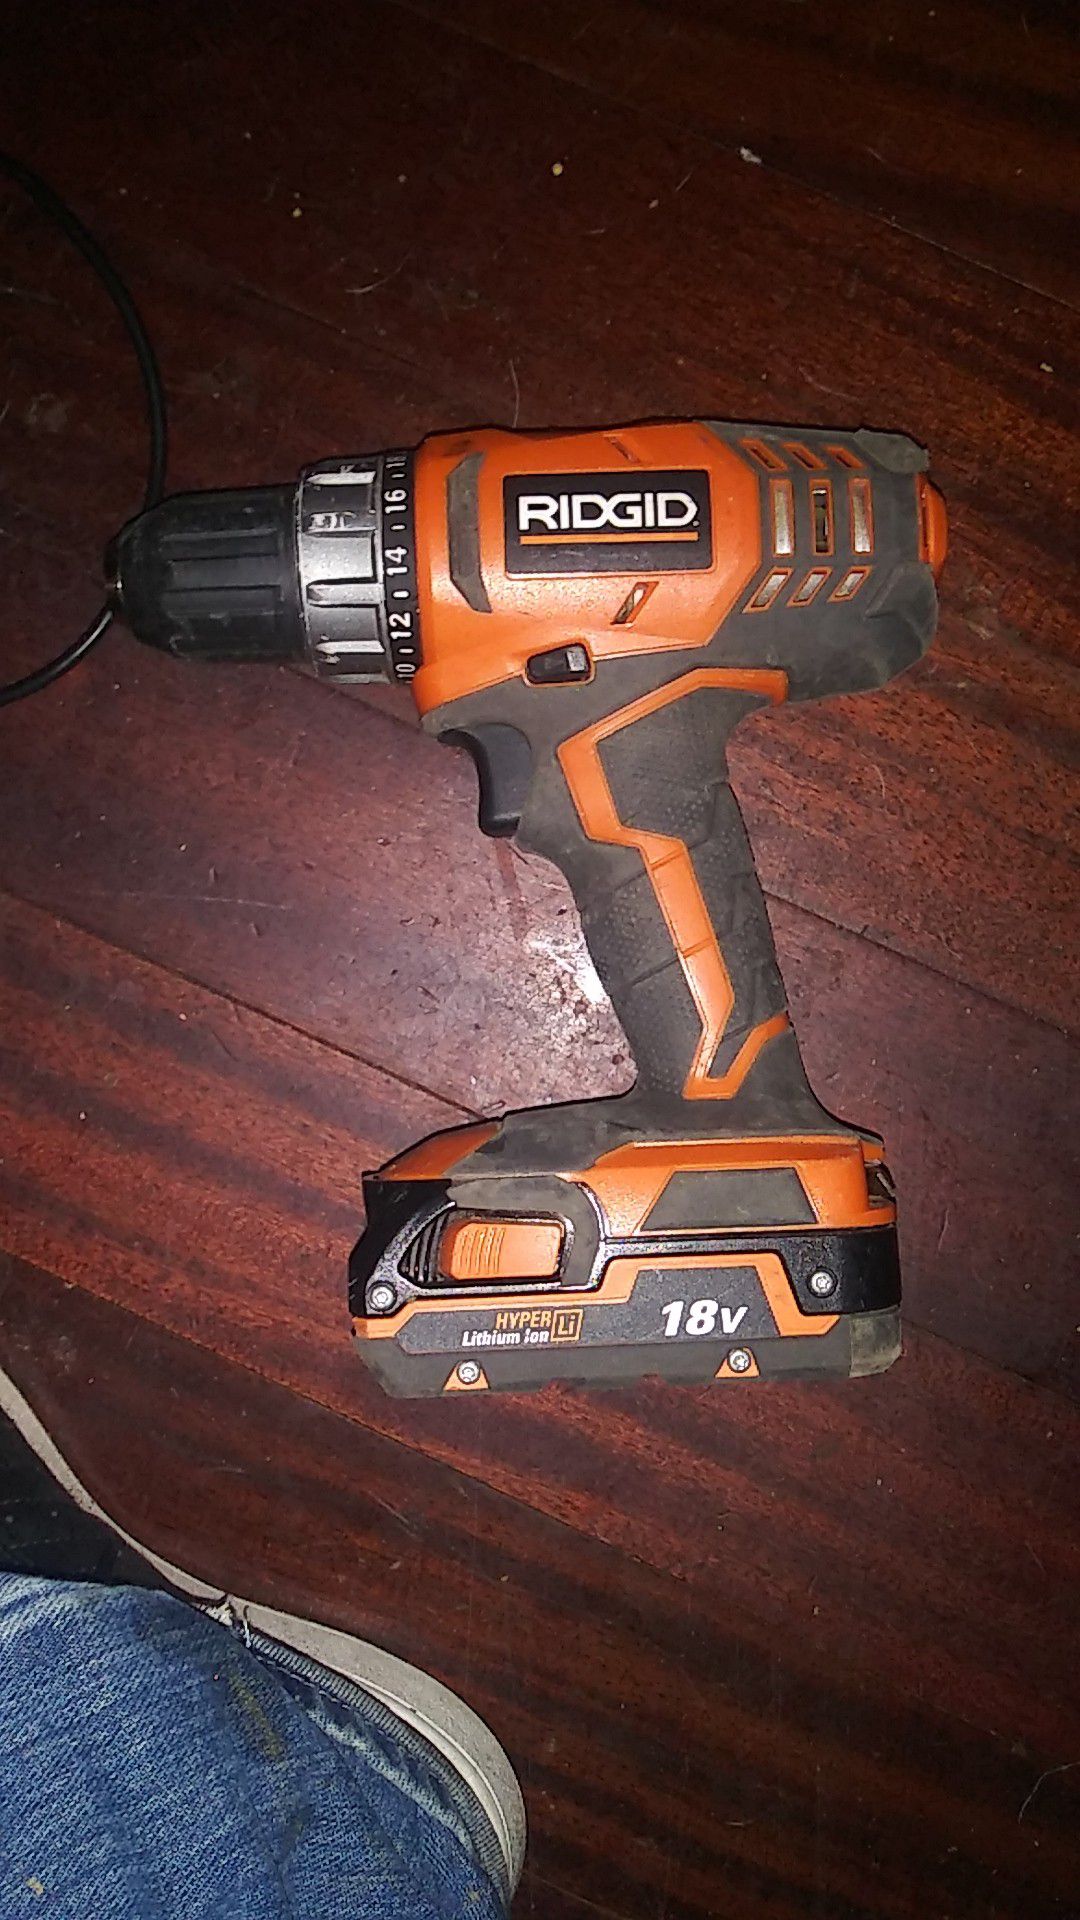 Ridgid cordless drill w/ battery and battery charger